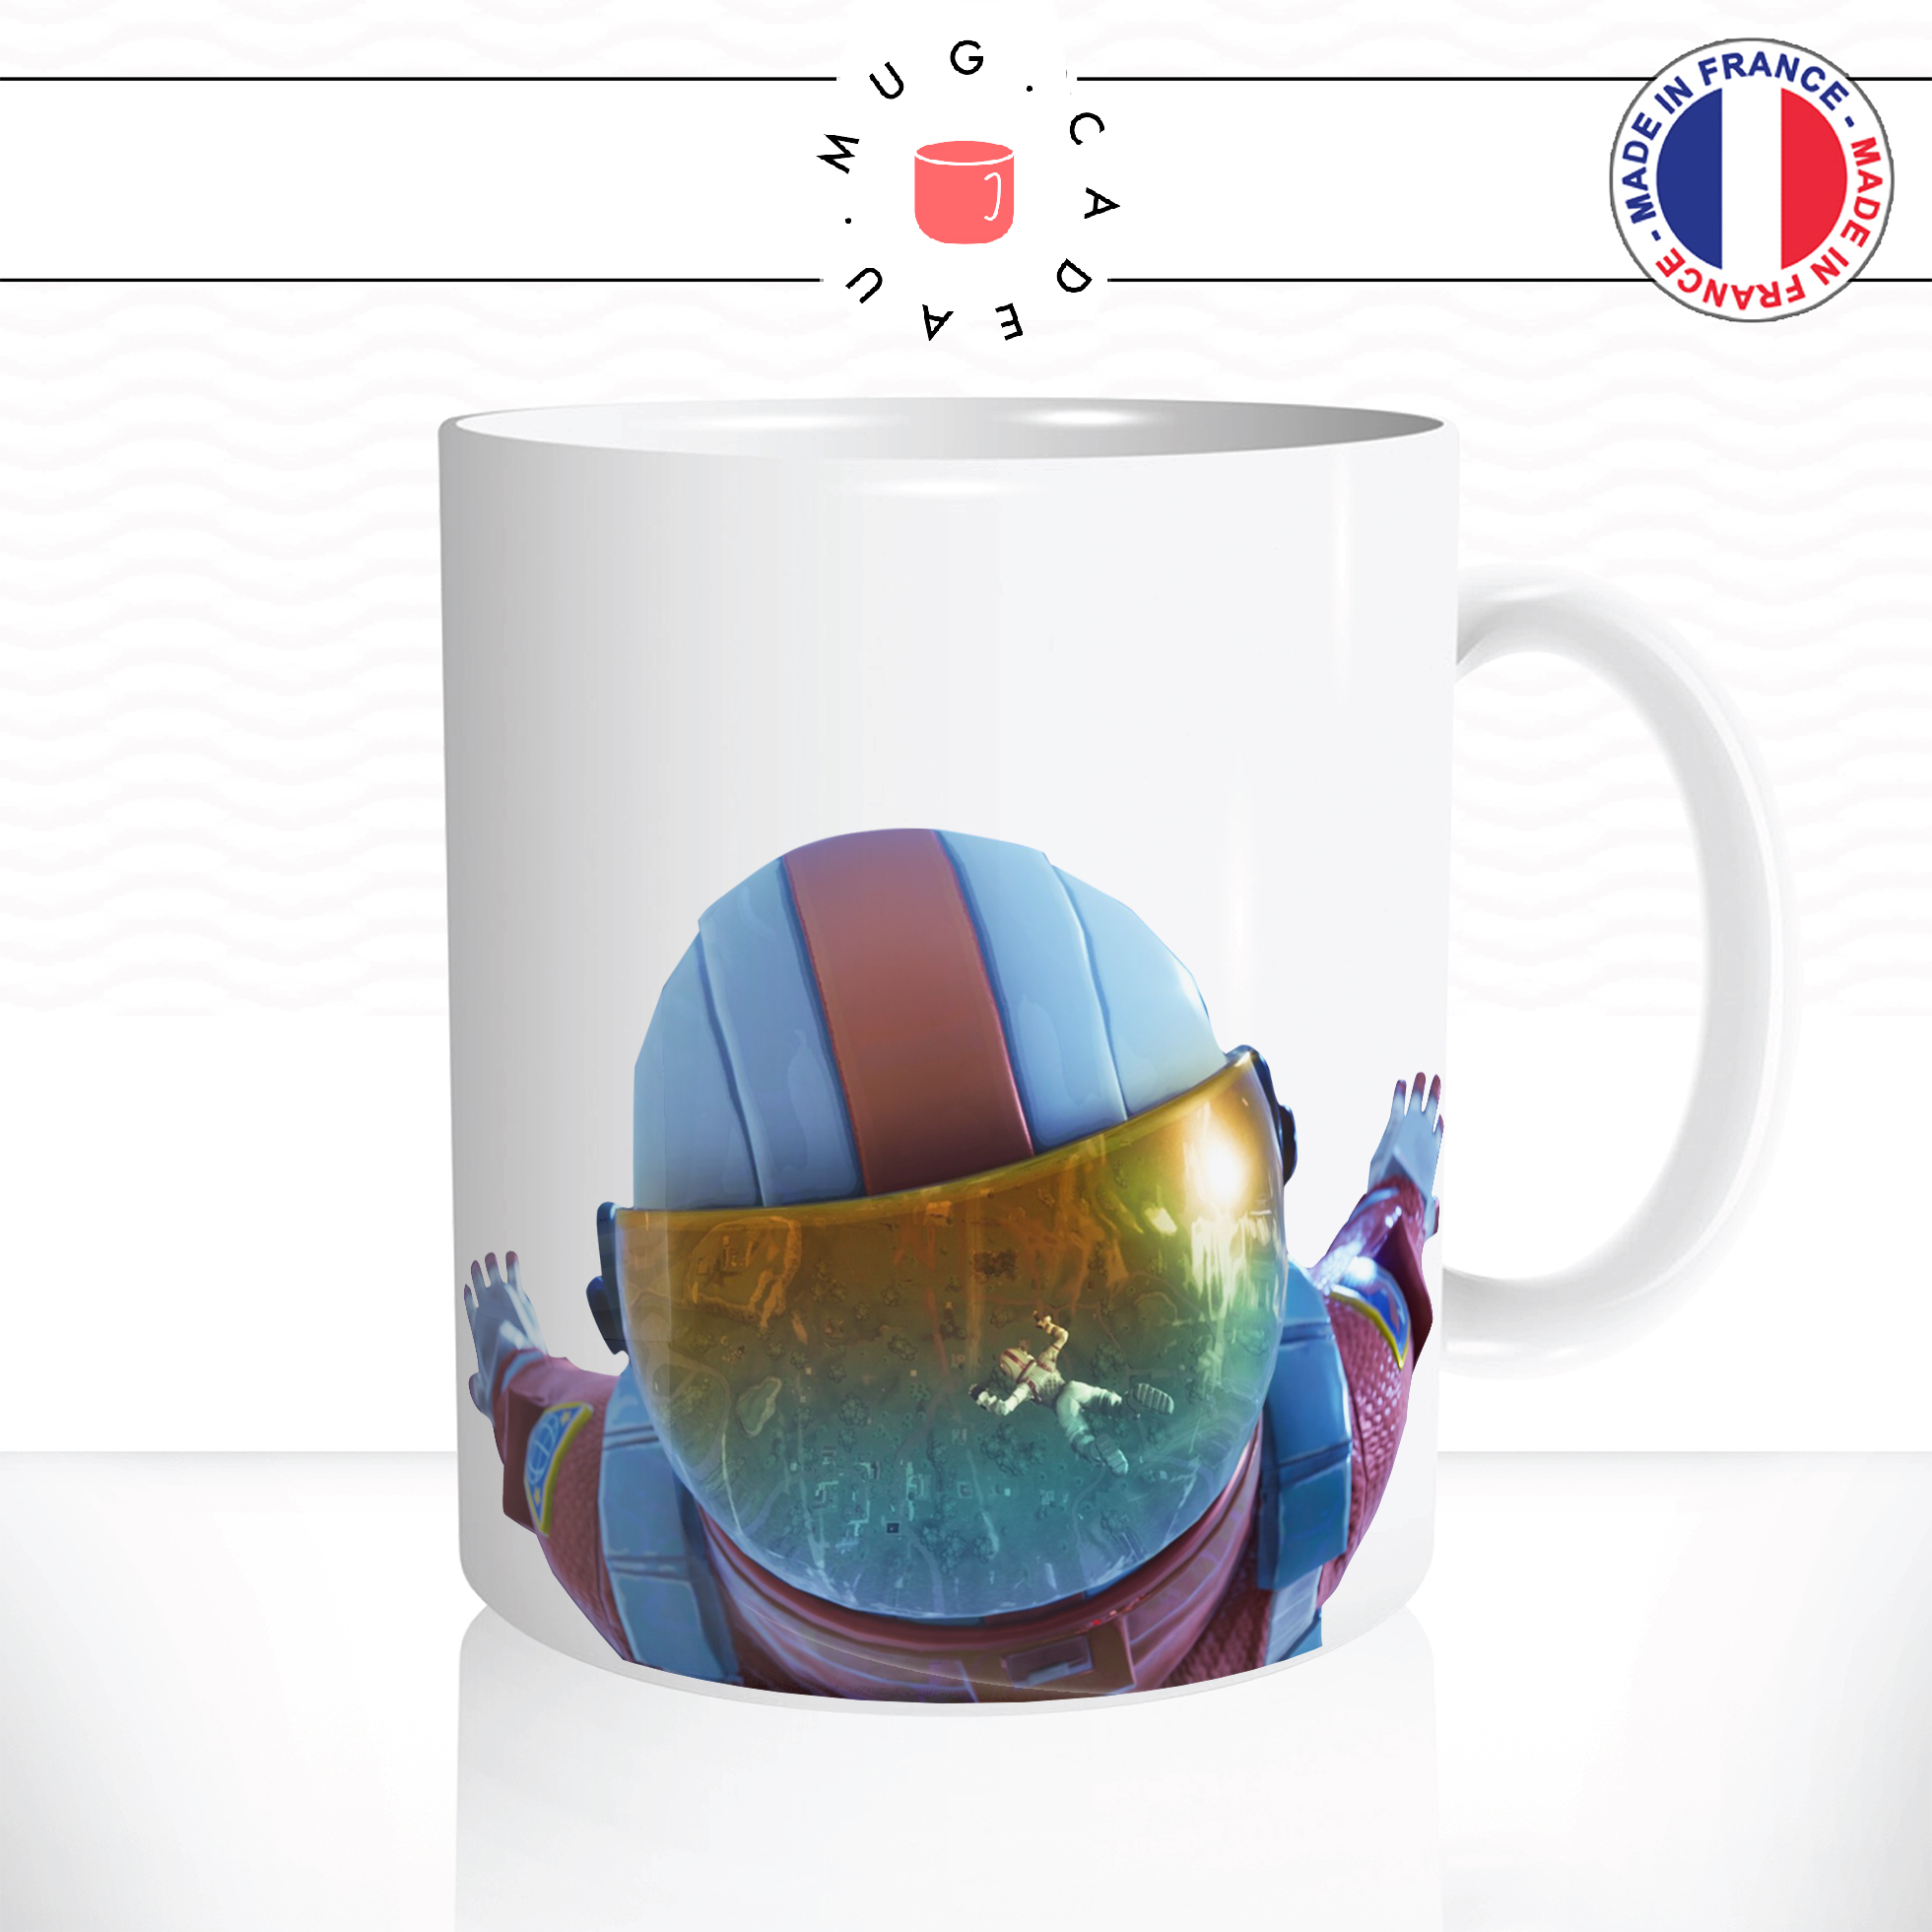 mug-tasse-ref16-jeux-video-fortnite-casque-tombe-vole-cafe-the-mugs-tases-personnalise-anse-droite